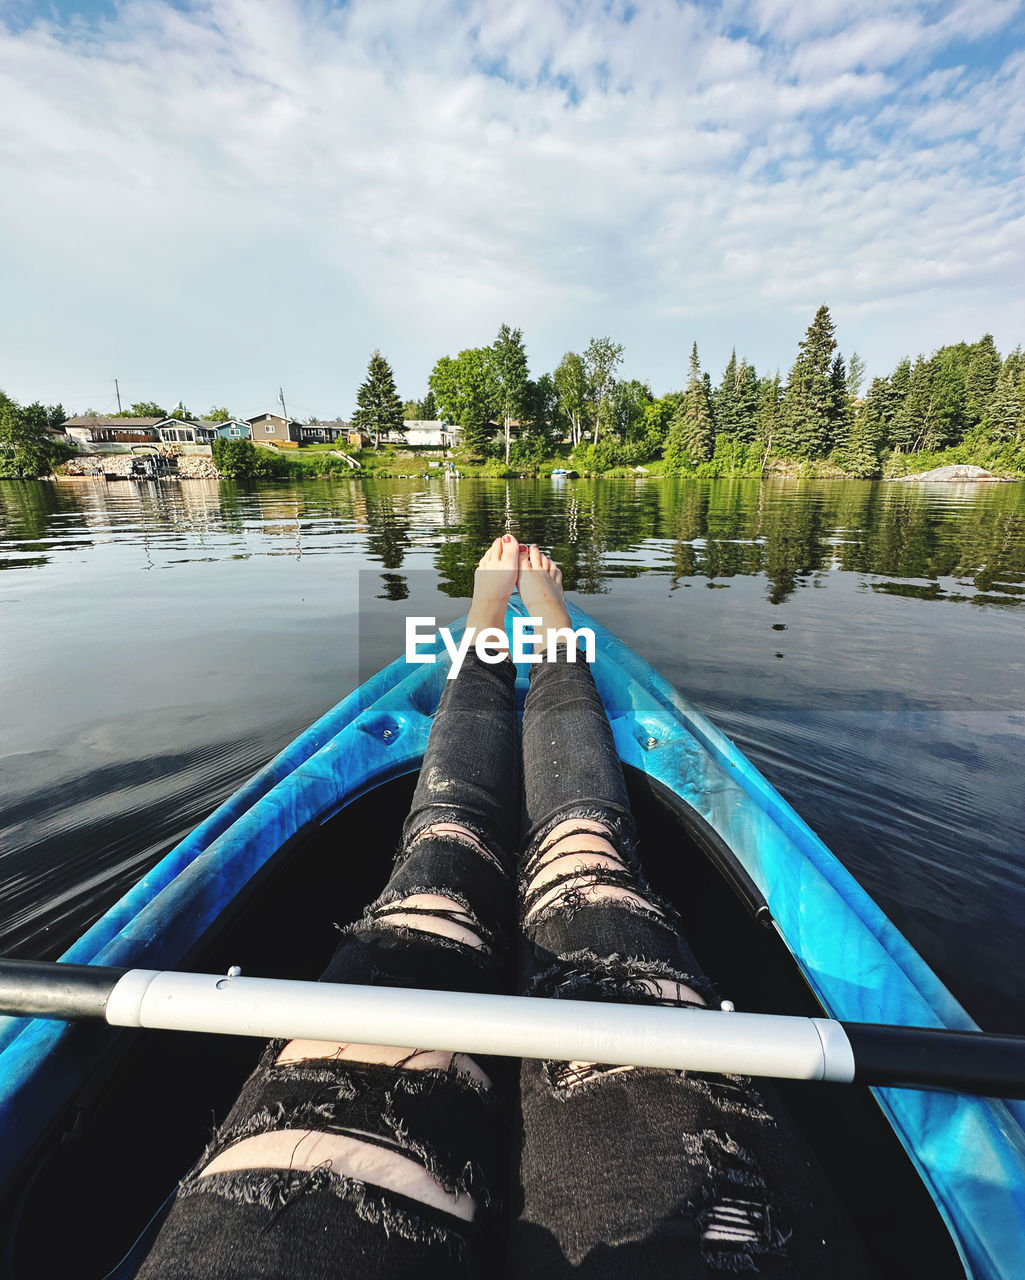 water, boat, vehicle, boating, personal perspective, nature, sky, one person, watercraft, human leg, transportation, nautical vessel, tree, low section, day, cloud, paddle, adult, relaxation, limb, leisure activity, lake, human limb, canoe, lifestyles, plant, outdoors, holiday, trip, vacation, blue, travel, kayak, mode of transportation, tranquility, reflection, sunlight, shoe, scenics - nature, travel destinations, beauty in nature